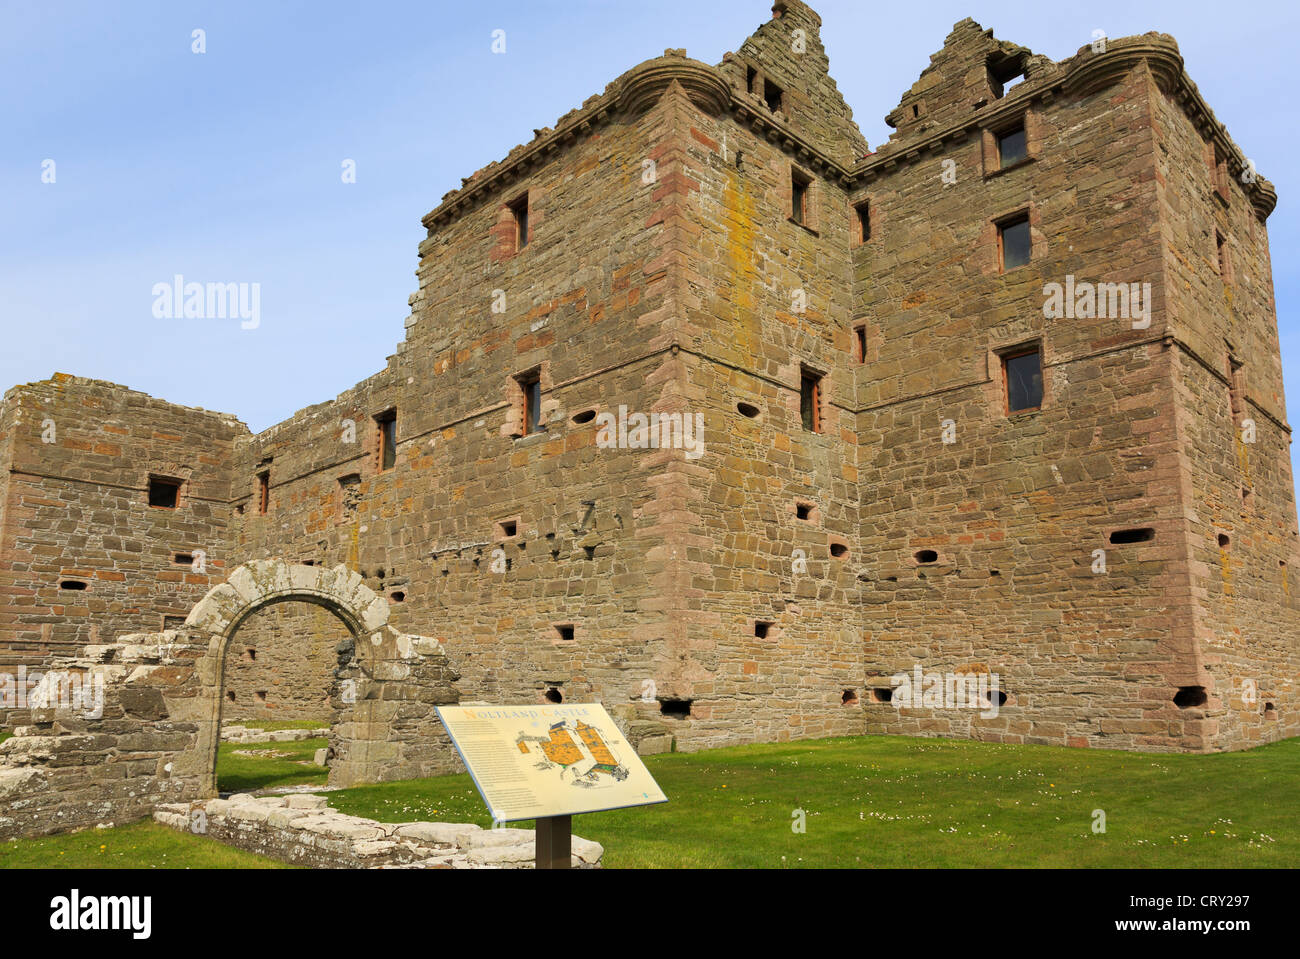 Ruins of 16th century Noltland Castle with tourist information board at Pierowall, Westray Island Orkney Islands Scotland UK Stock Photo